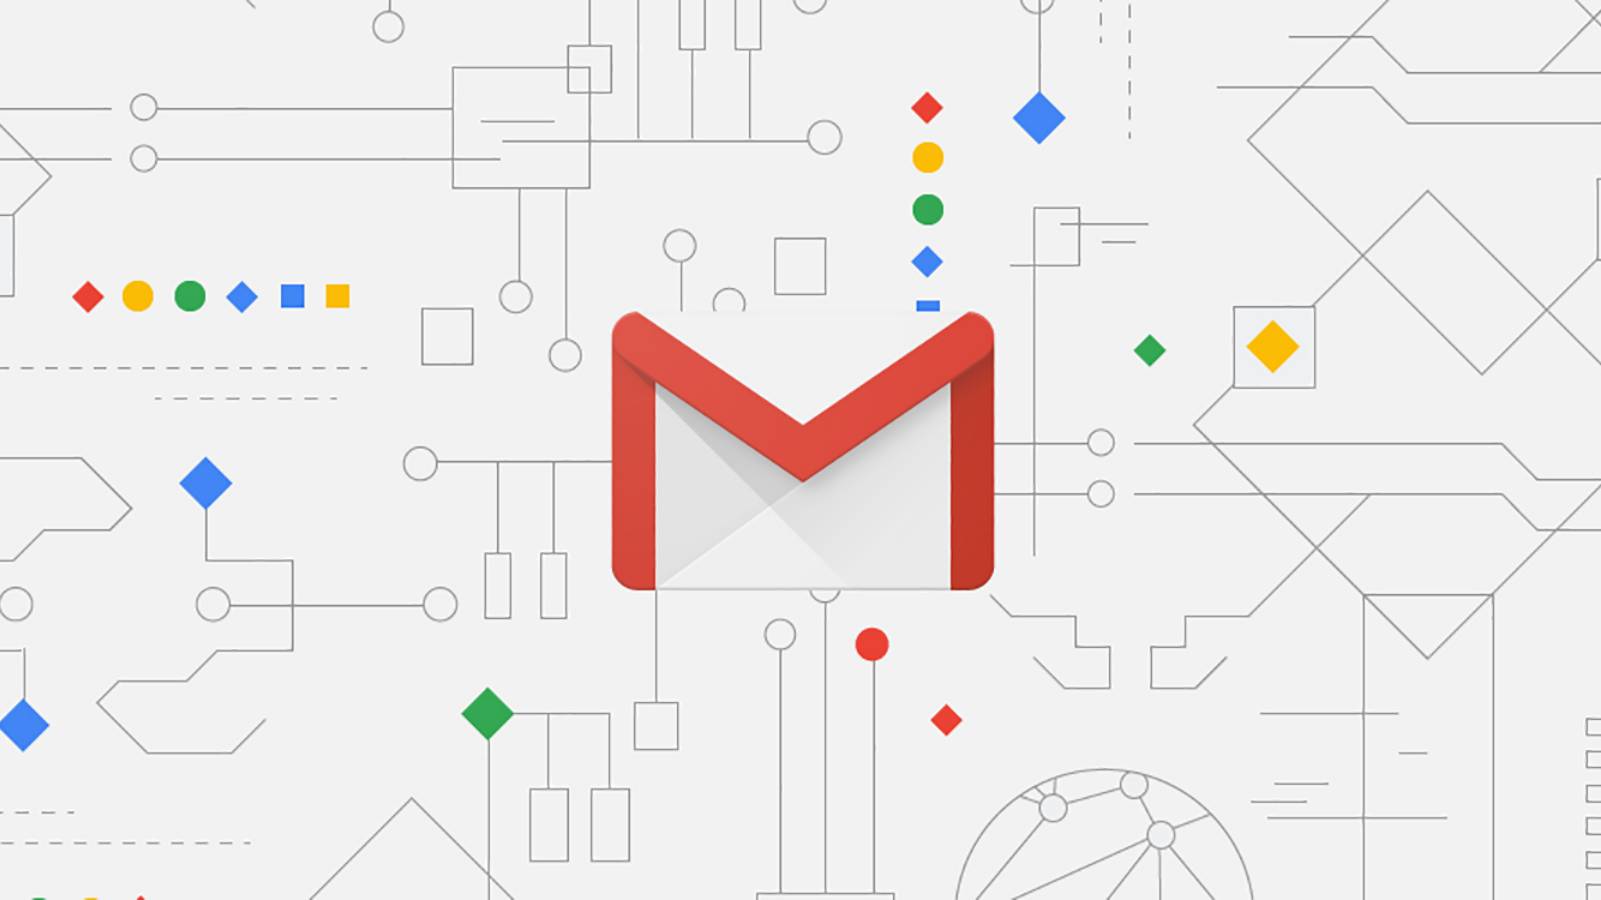 GMAIL Will Be Able to Initiate and Accept Phone and Video Calls